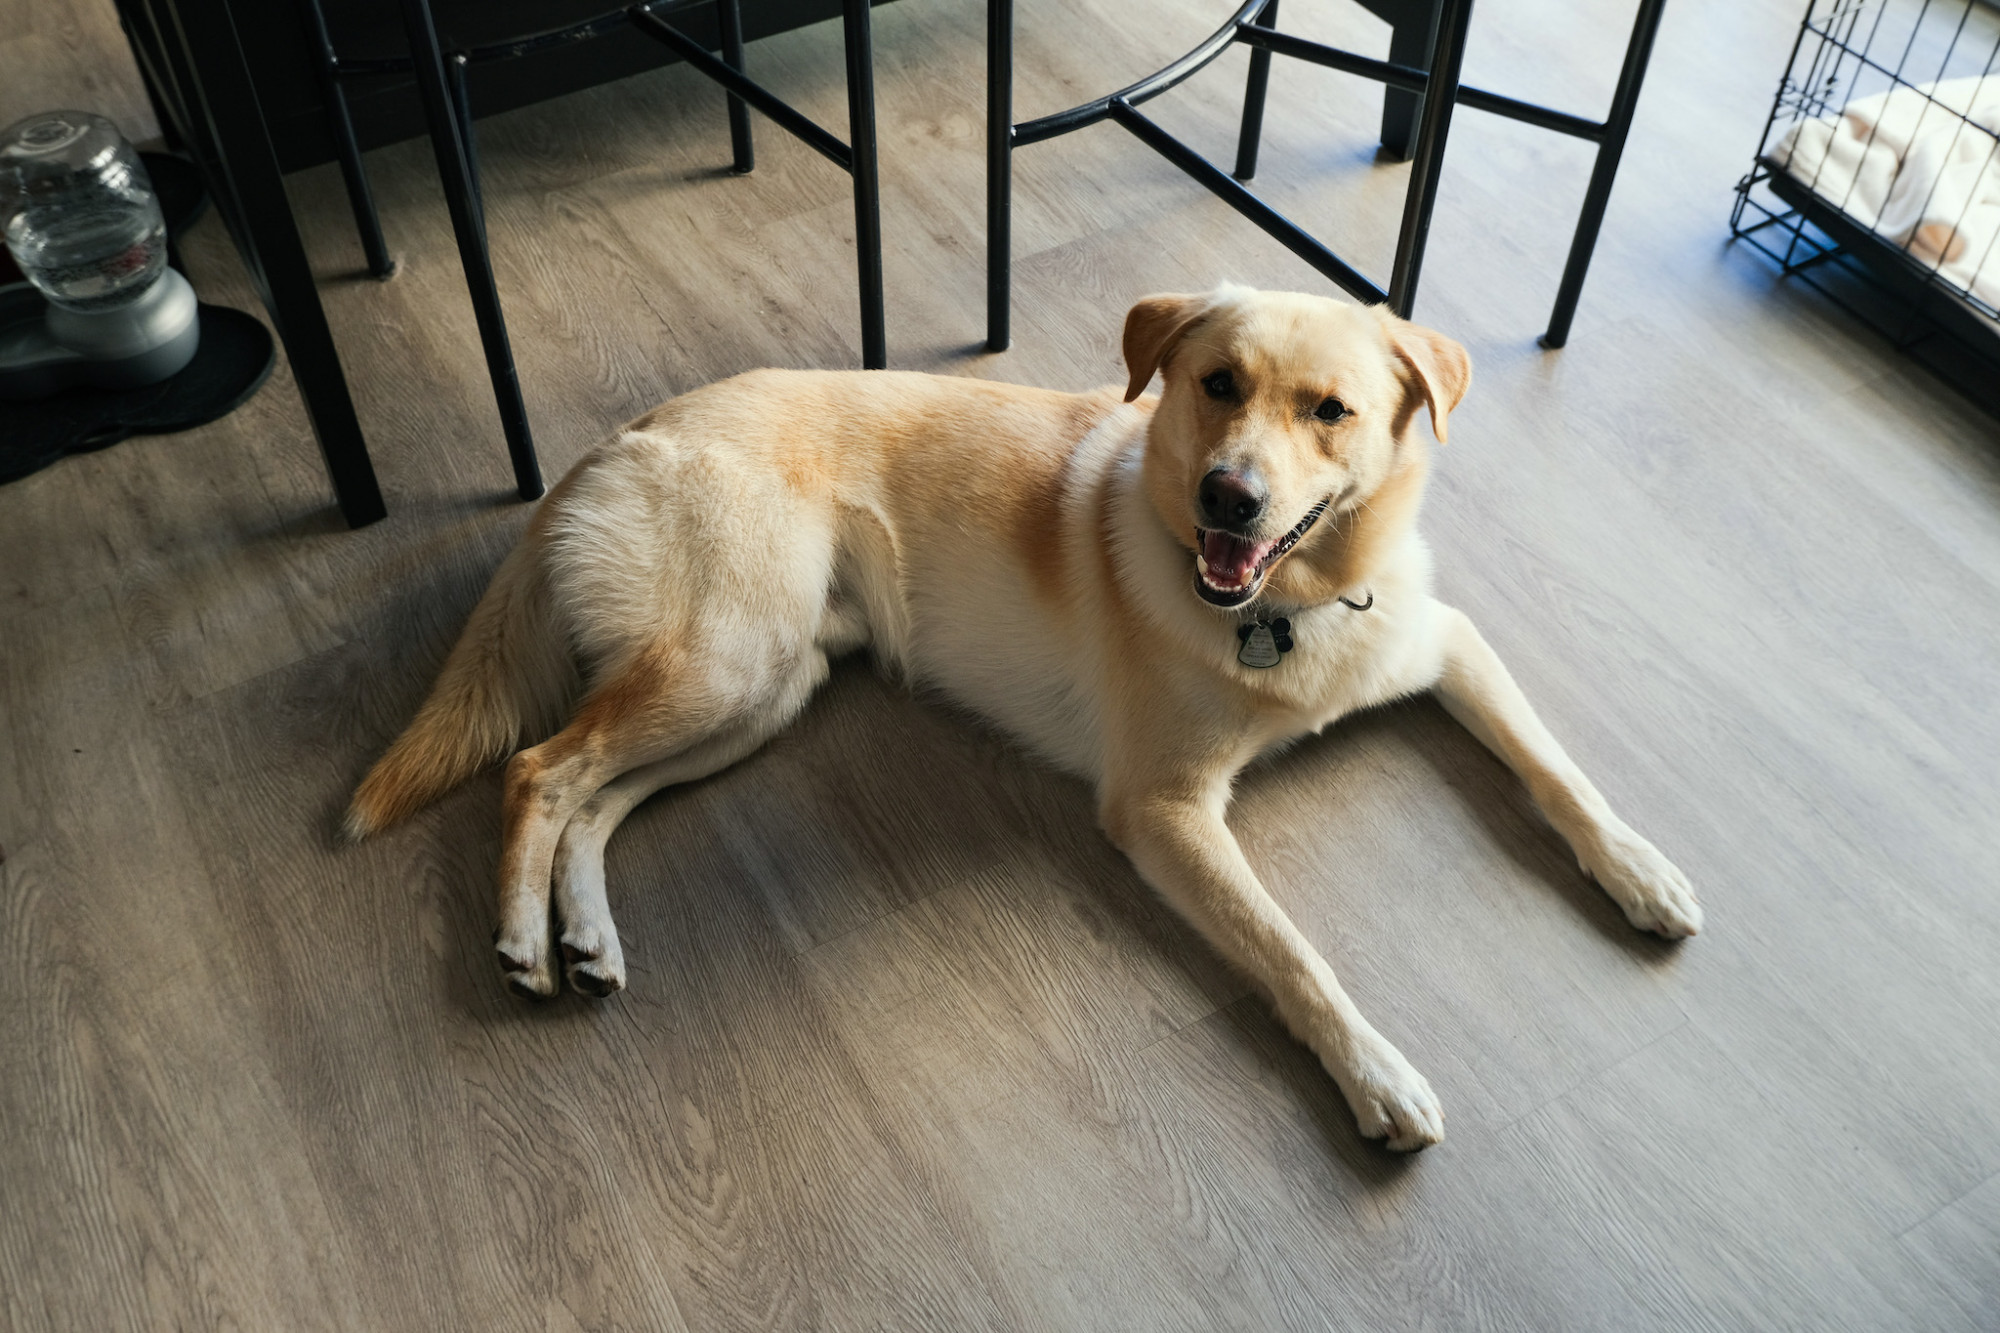 A golden Labrador lounges on the kitchen floor, and looks to be smiling